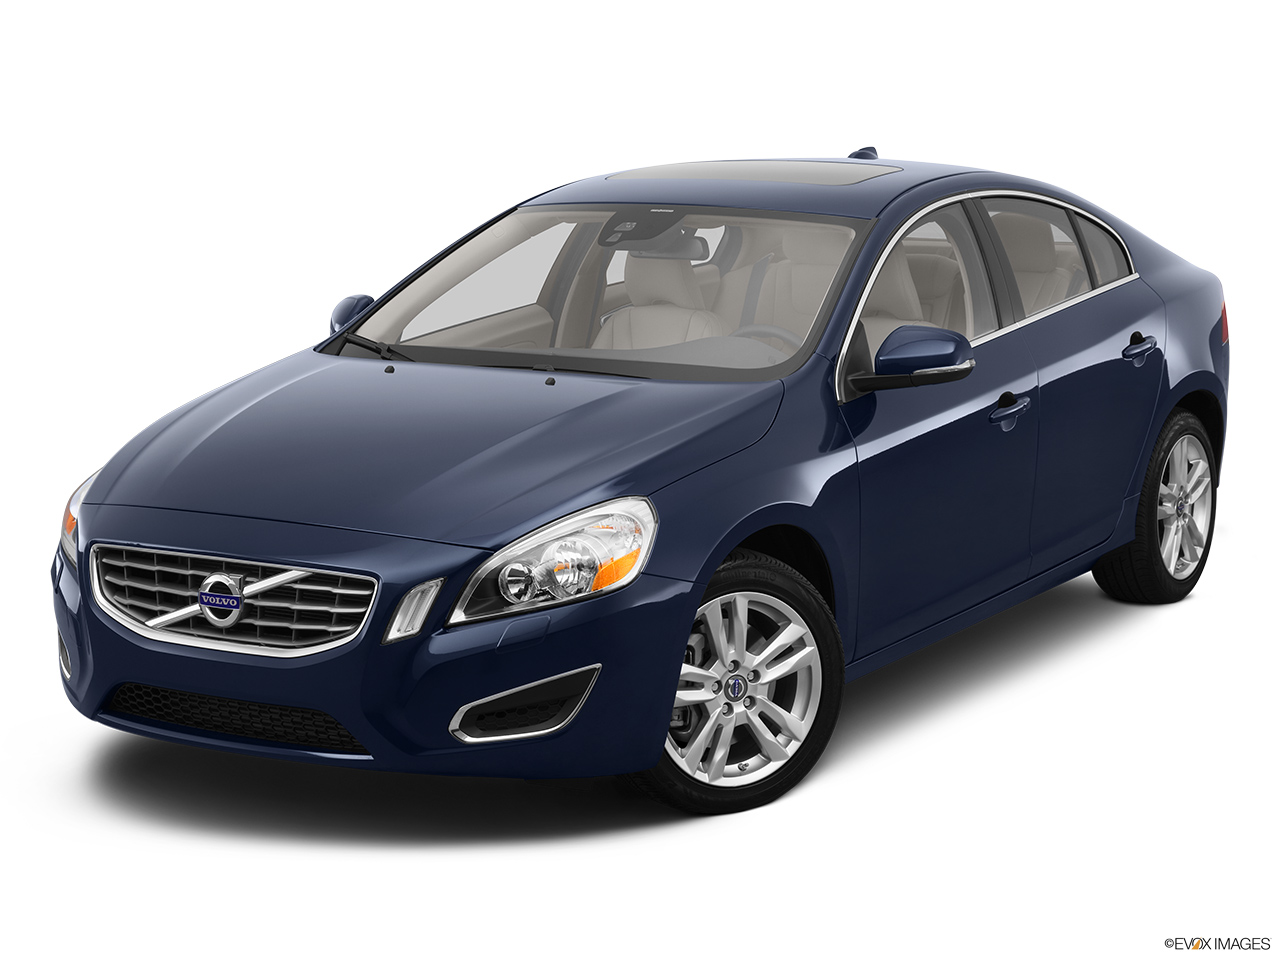 2013 Volvo S60 T5 FWD Premier Front angle view. 